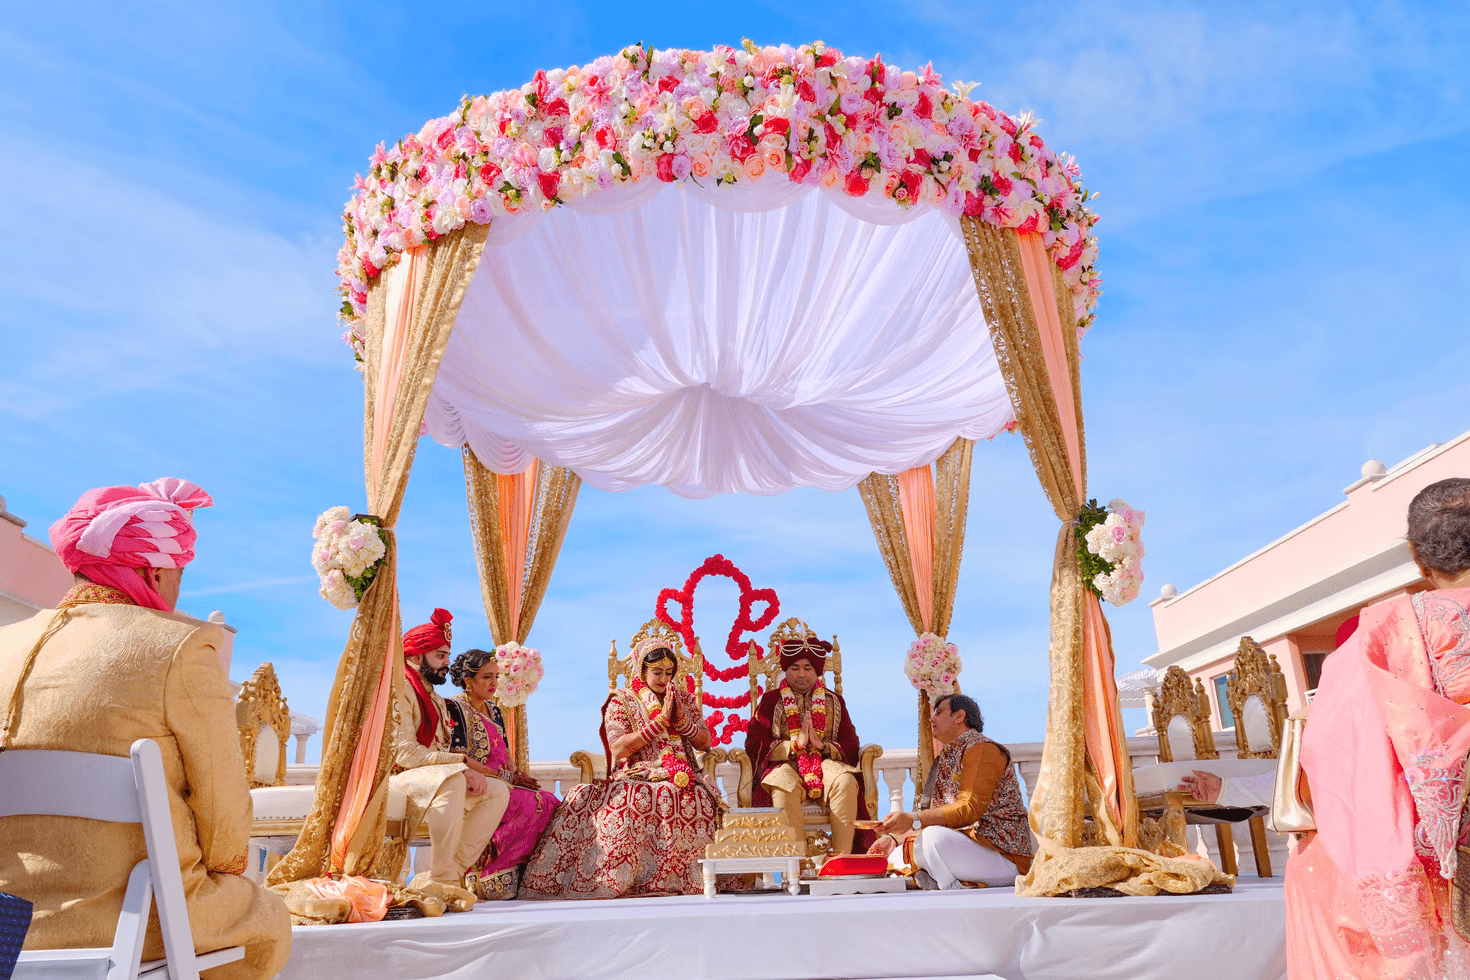 11 Tips And Ideas To Nail Indian Wedding Outdoor Photoshoot